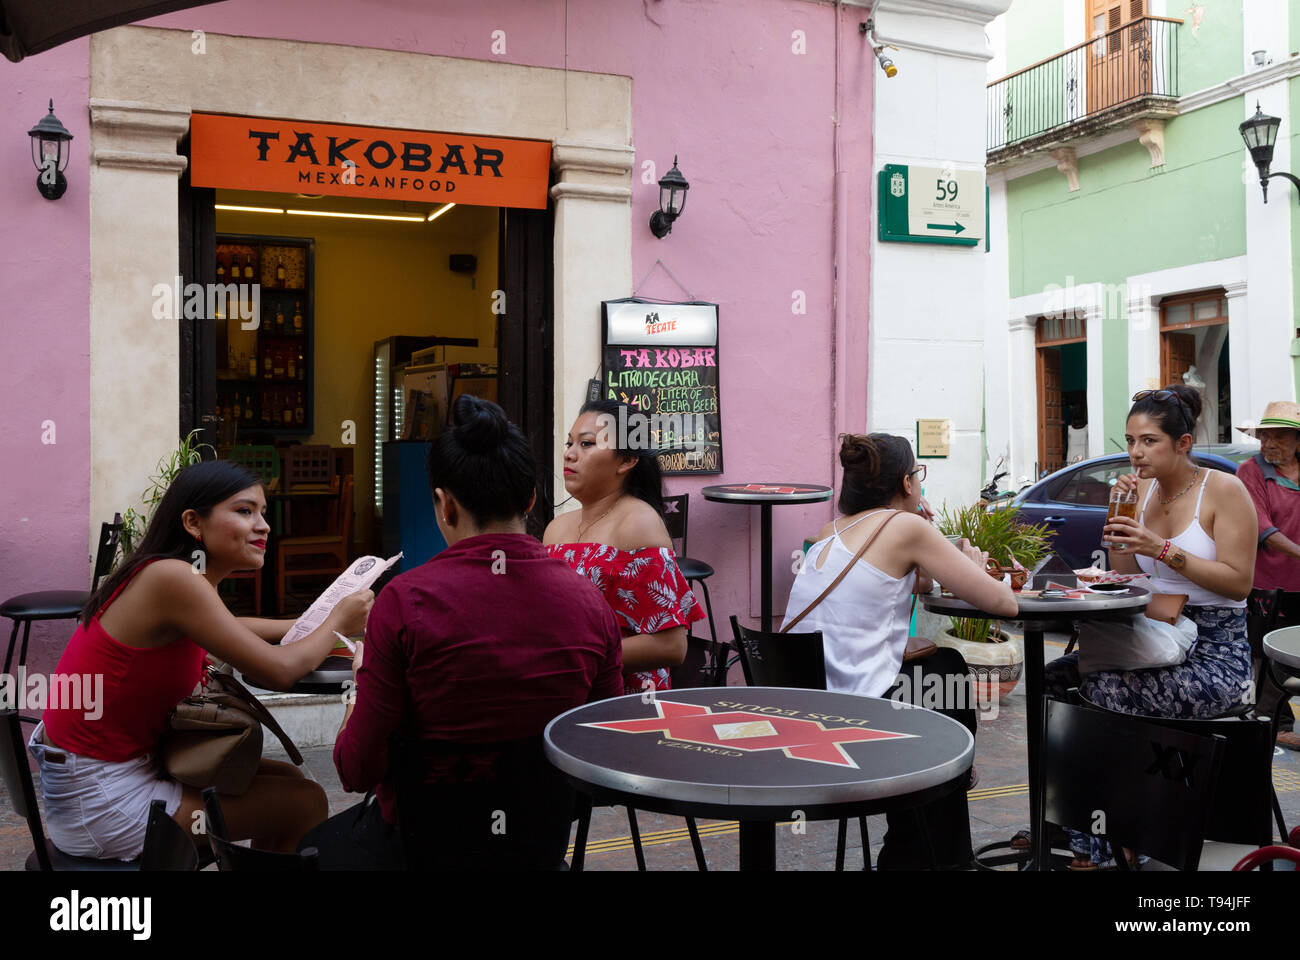 Latin America food - people eating at a taco bar cafe outside, Campeche old town UNESCO world heritage site, Campeche Mexico, Latin America Stock Photo